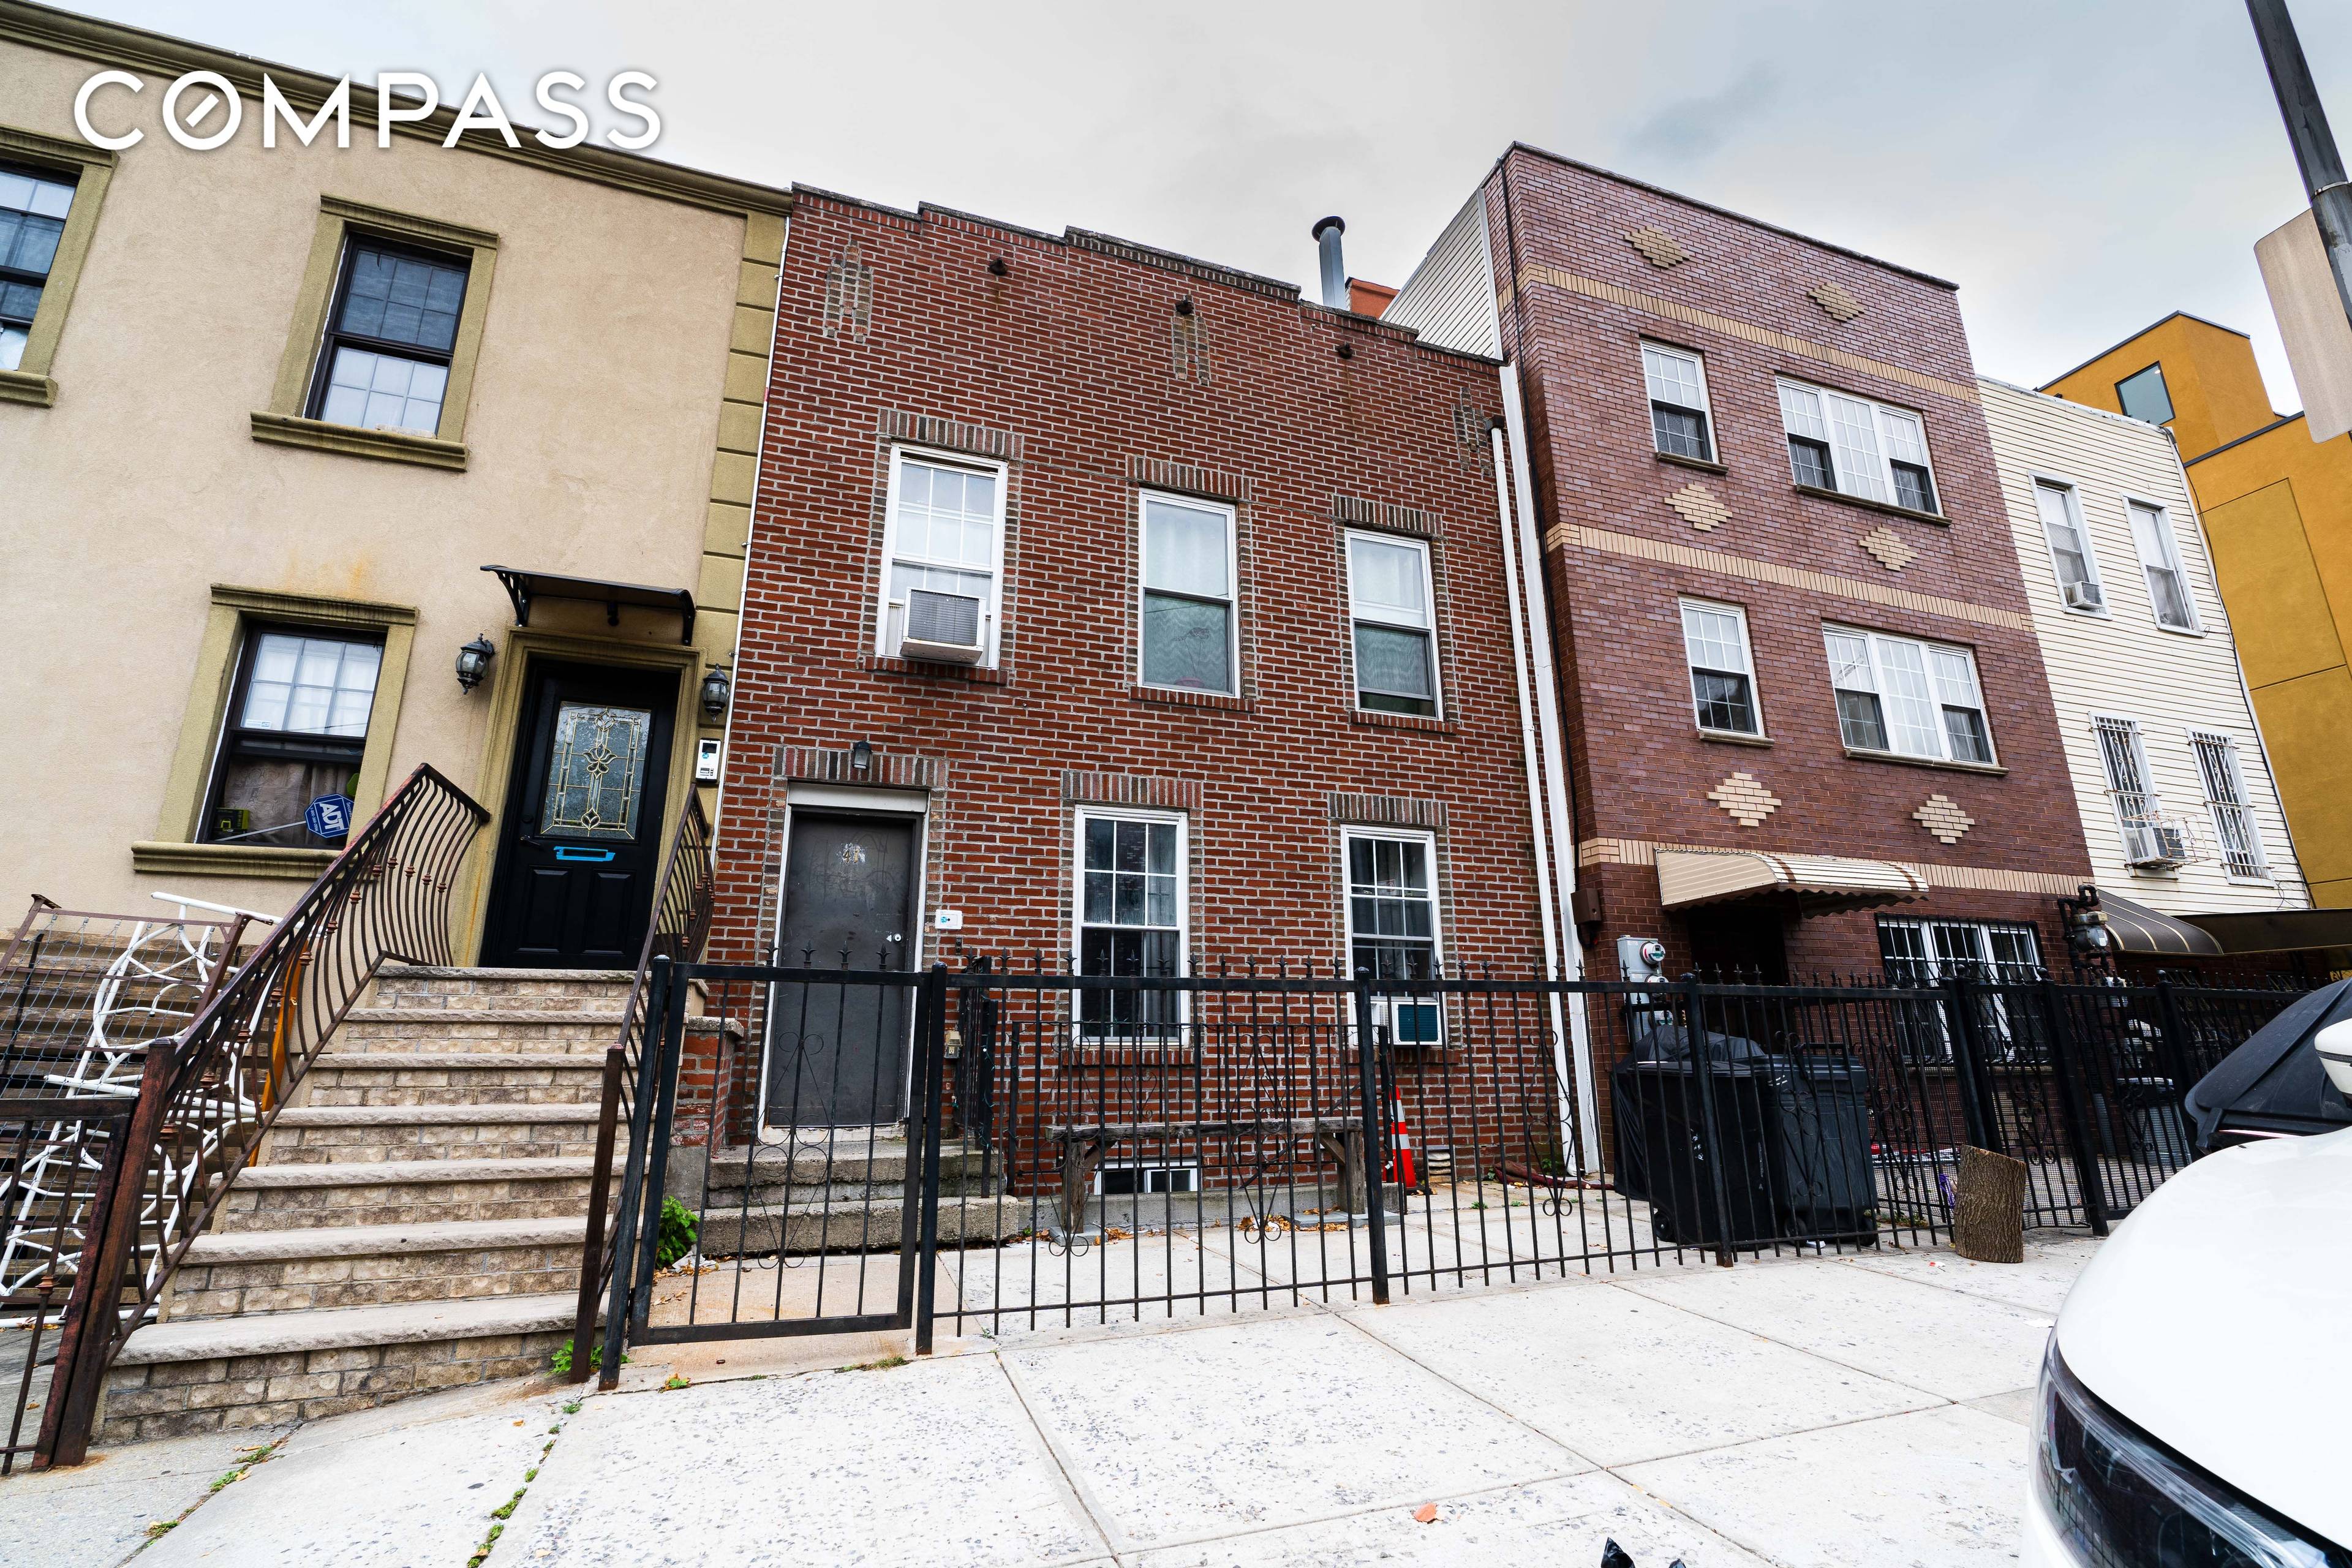 Introducing stately built brick 2 family in the heart of Bedford Stuyvesant at the price of a condo unit in the area.